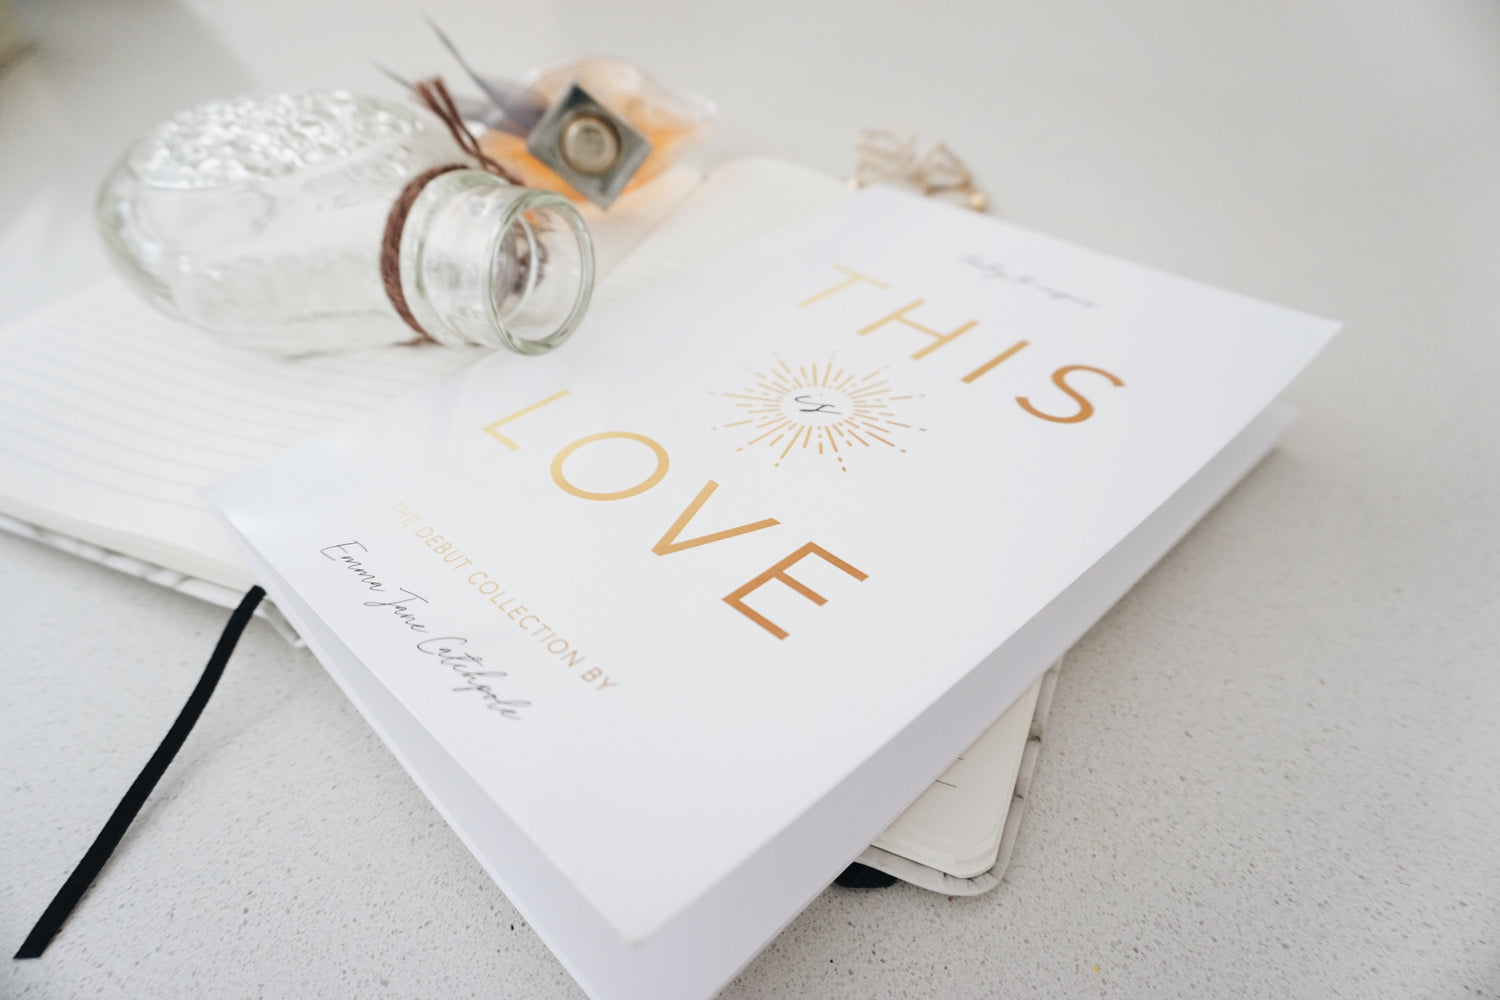 This is Love poetry book